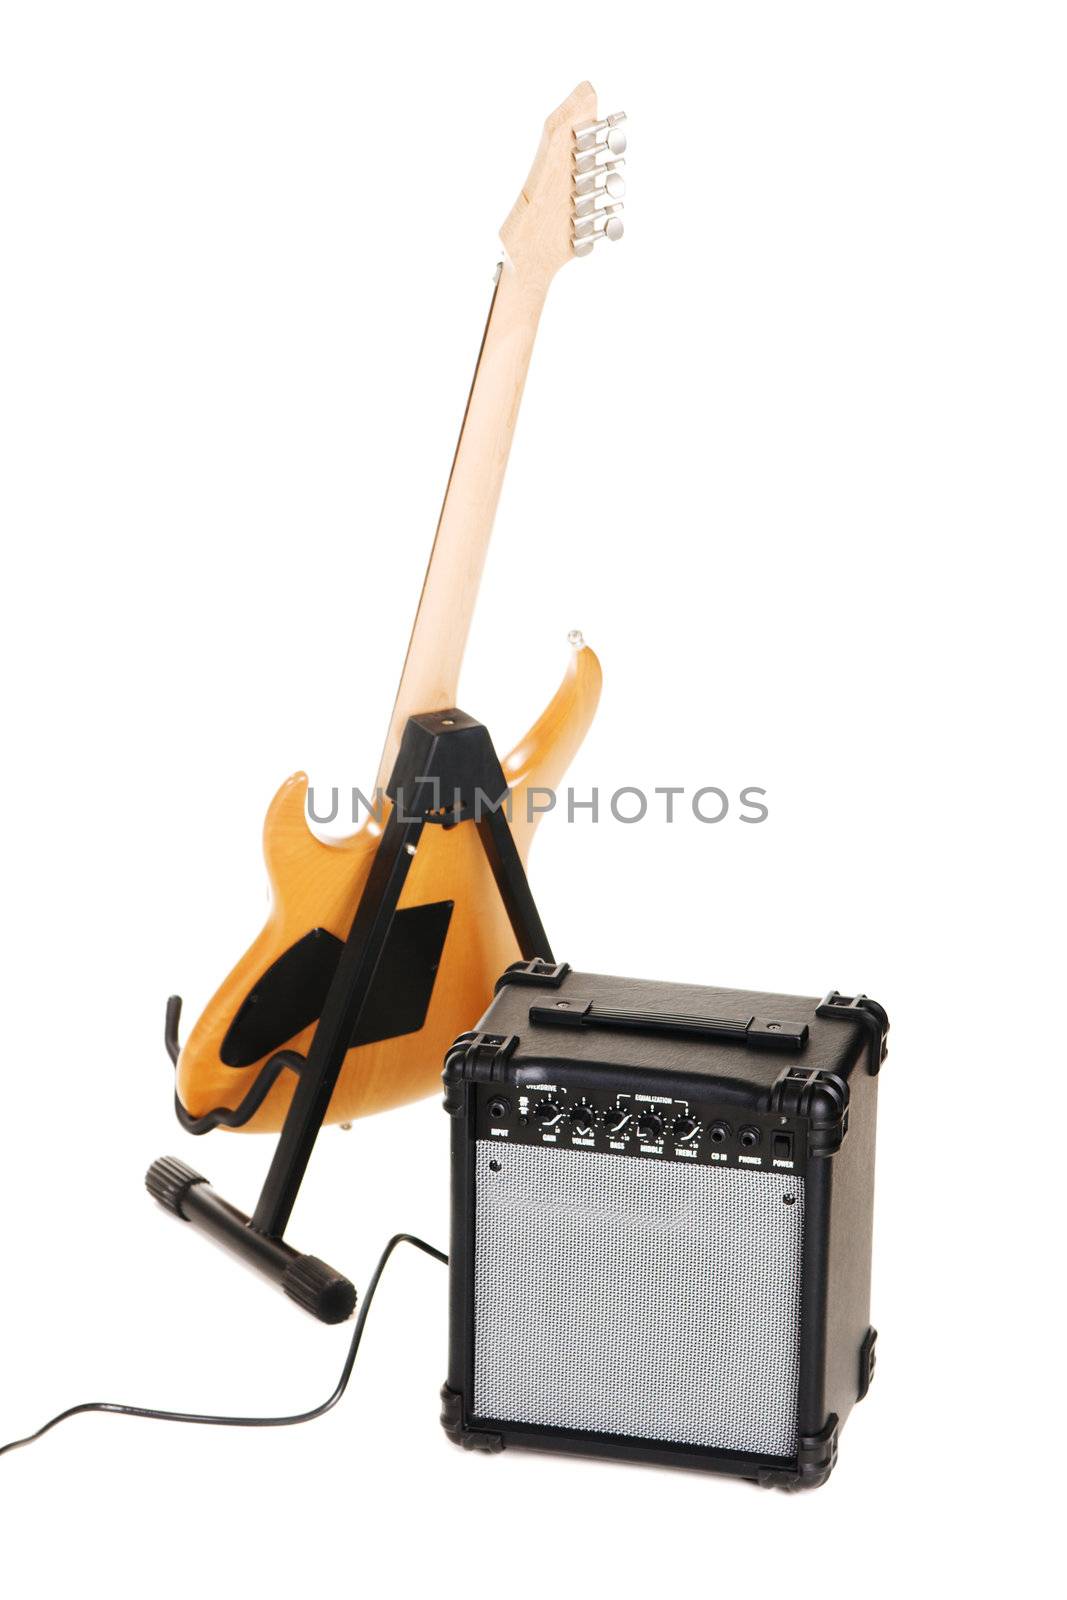 Electric guitar with amplifier, white background